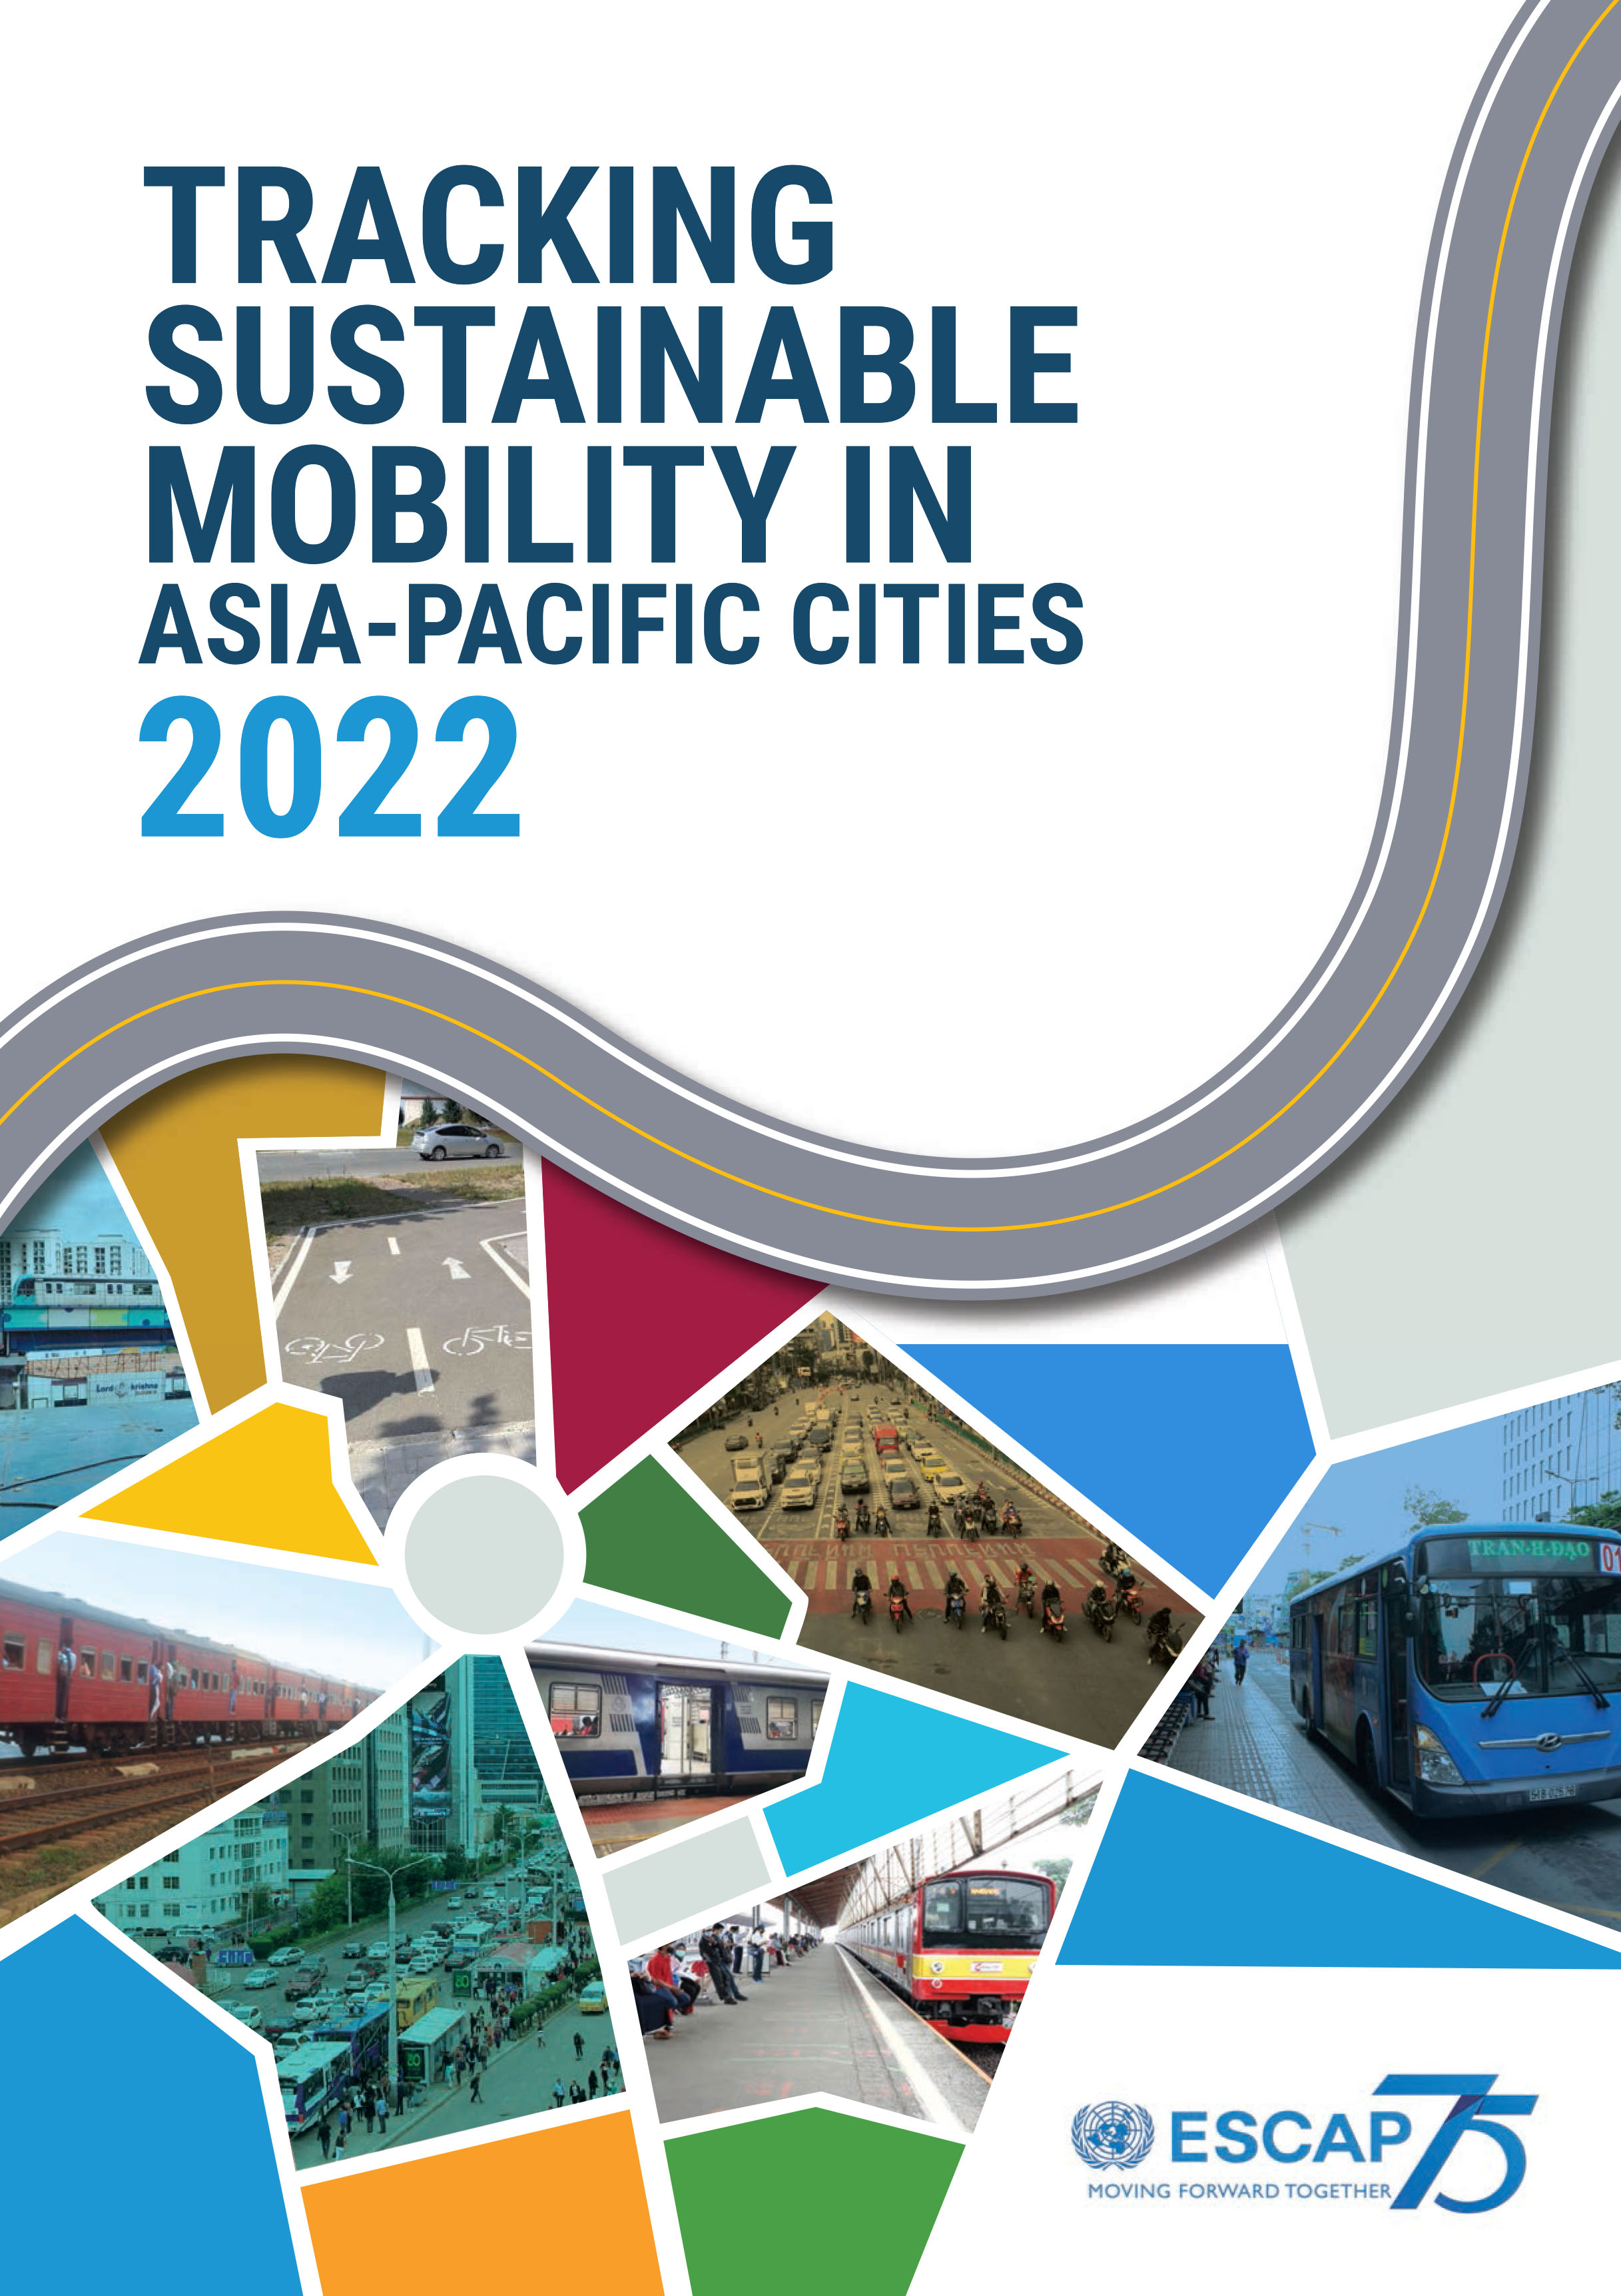 image of Tracking Sustainable Mobility in Asia-Pacific Cities 2022